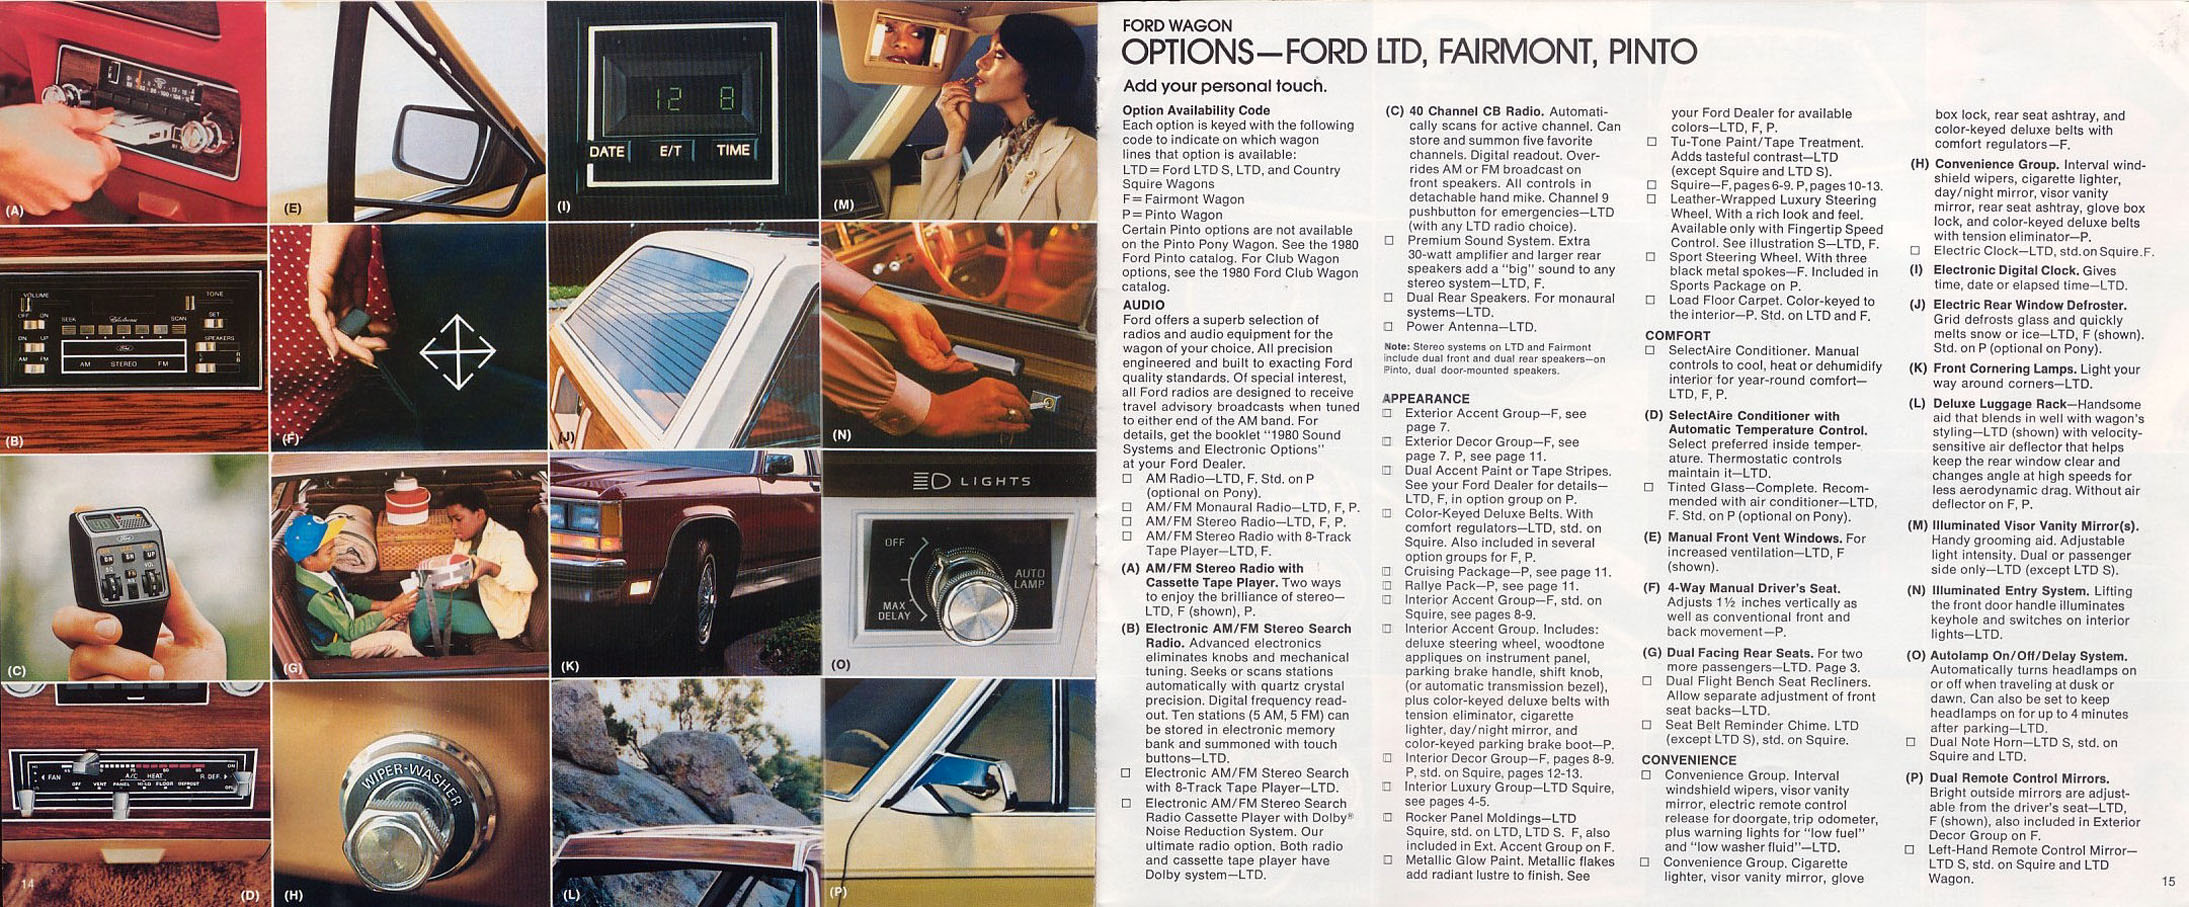 1980 Ford Wagons-08